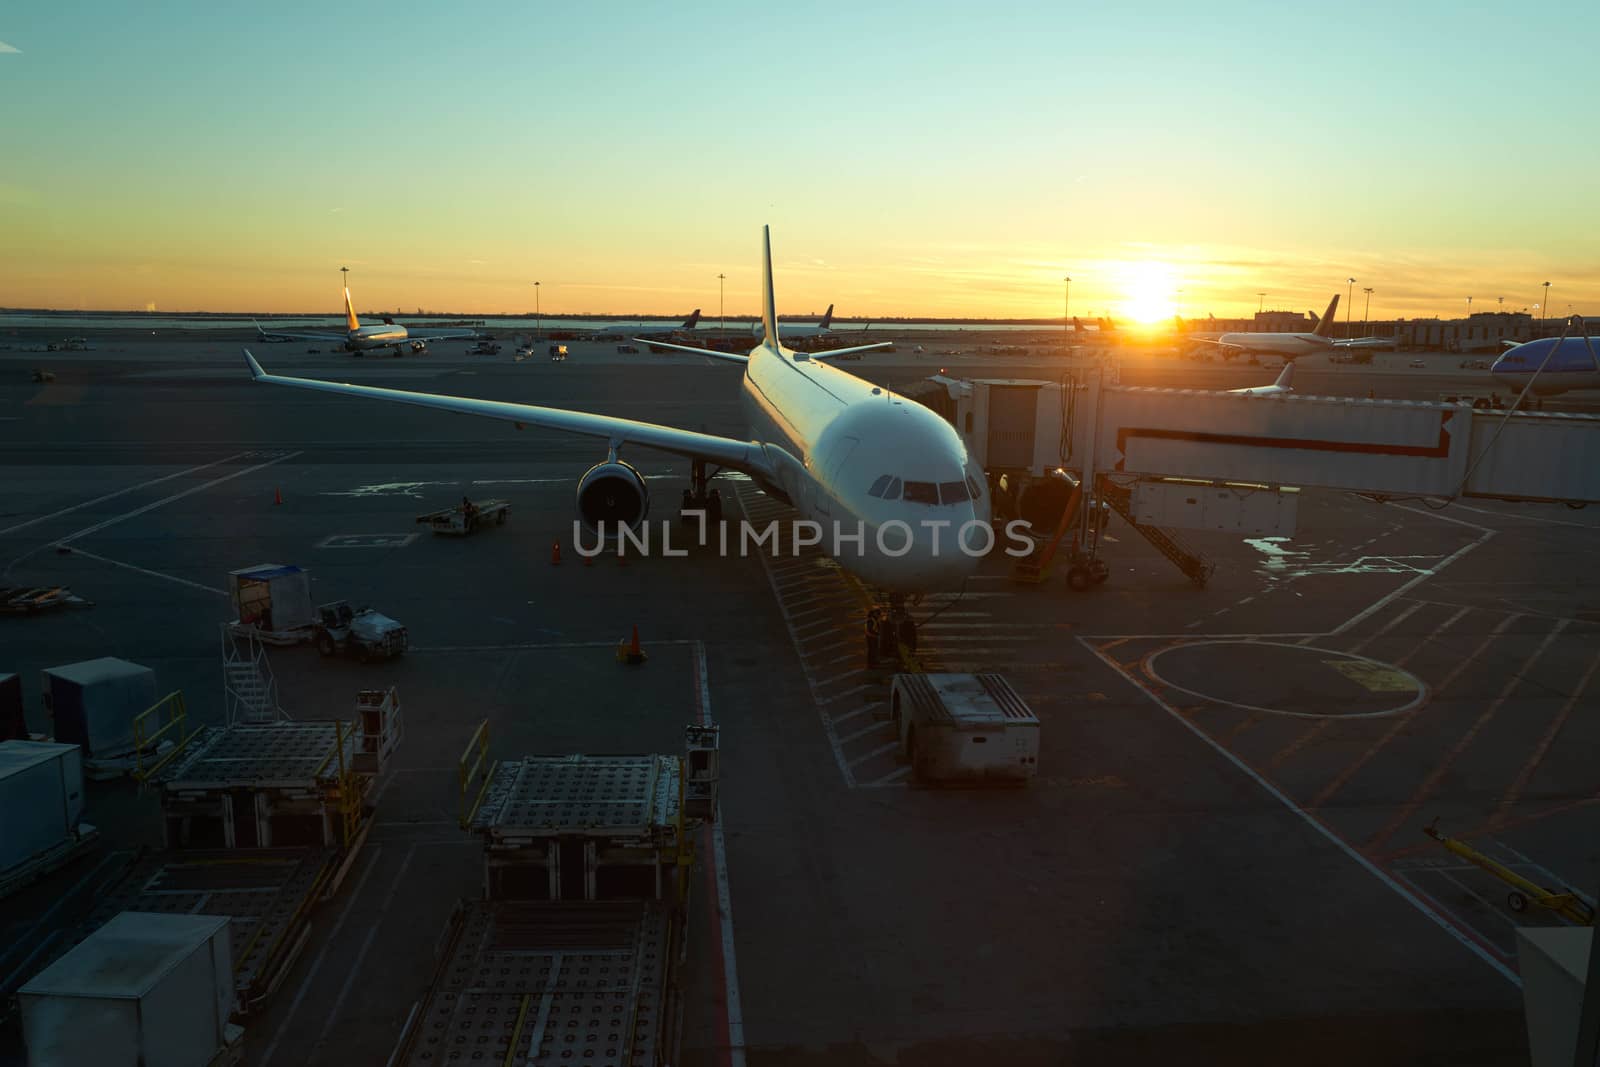 Docked Plane at airport on sunset by Lordignolo